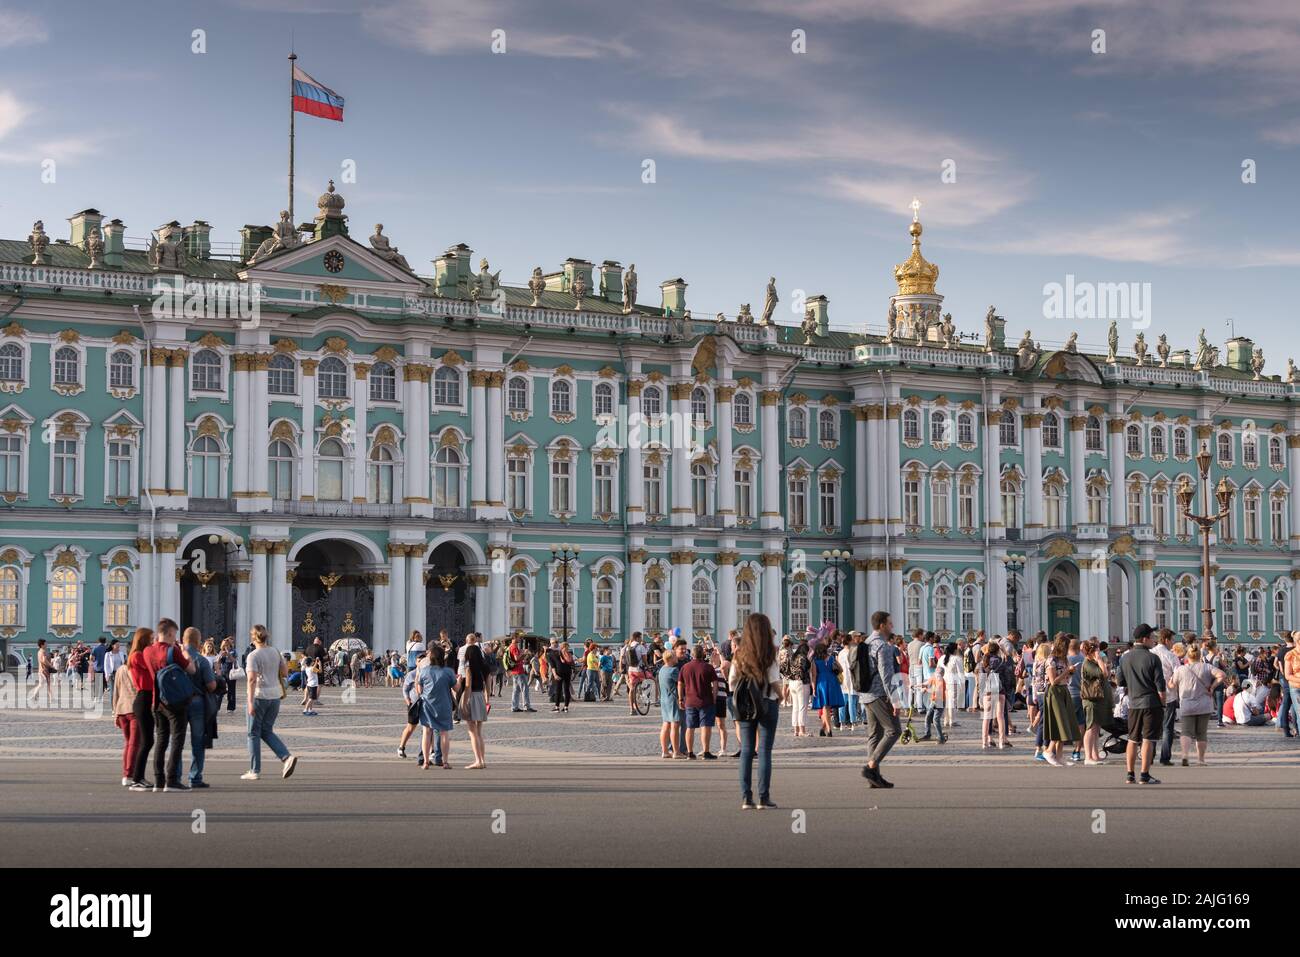 Saint Petersburg, Russia: People in Palace Square in front of Hermitage Museum (Winter Palace), second largest art museum in the world Stock Photo